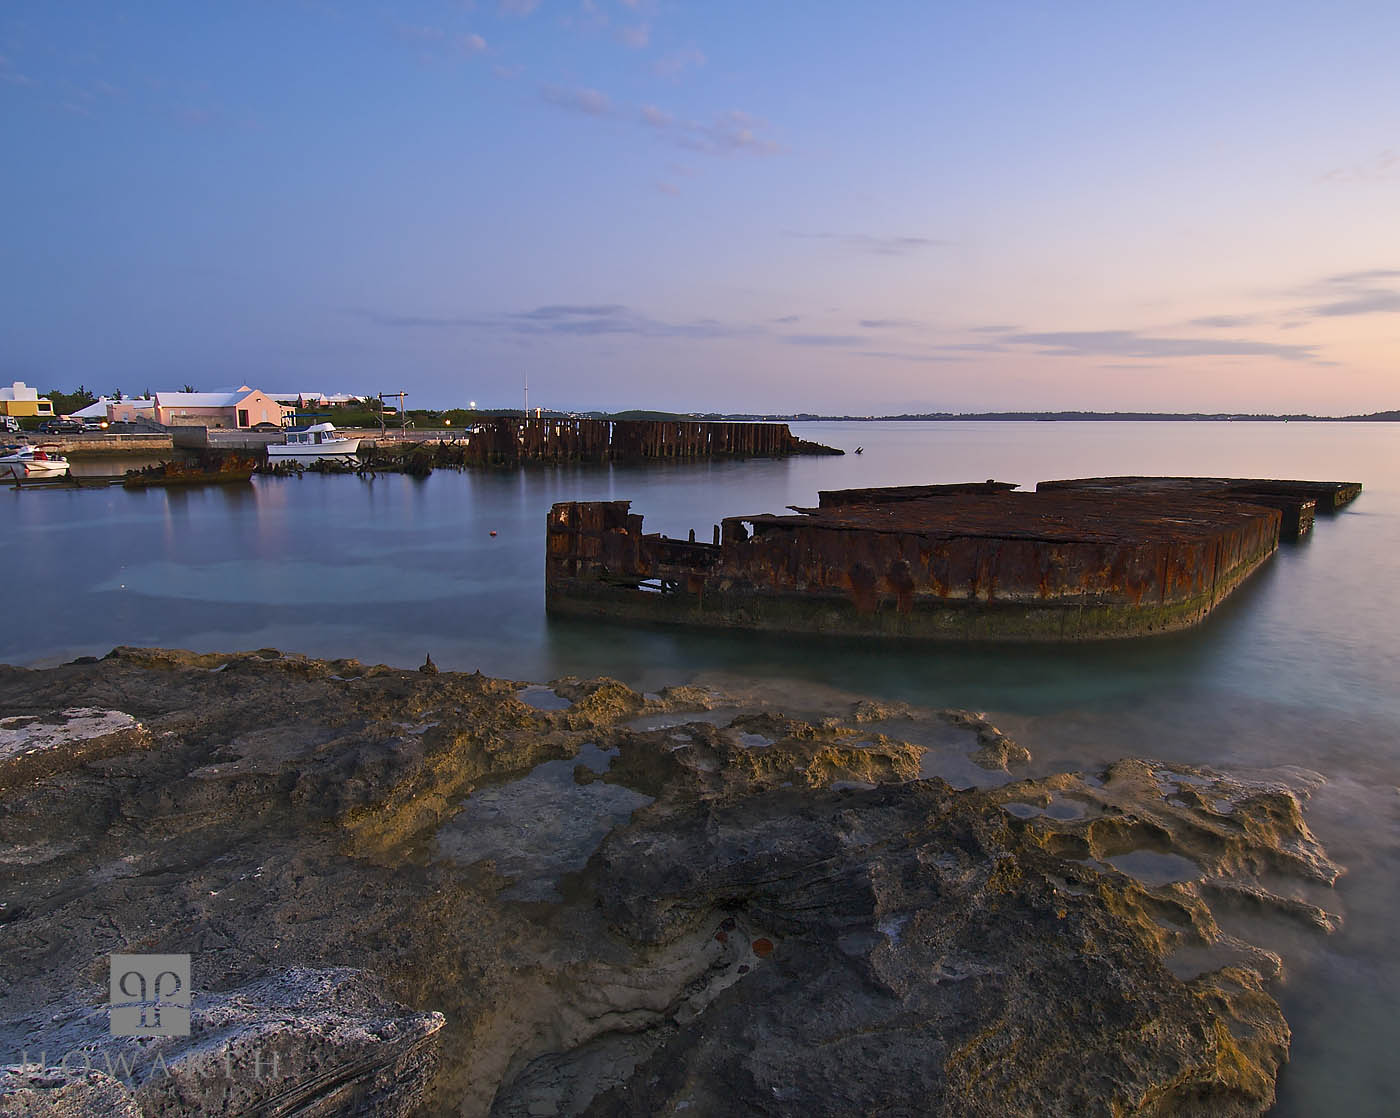 An old drydock wreck lays abandoned